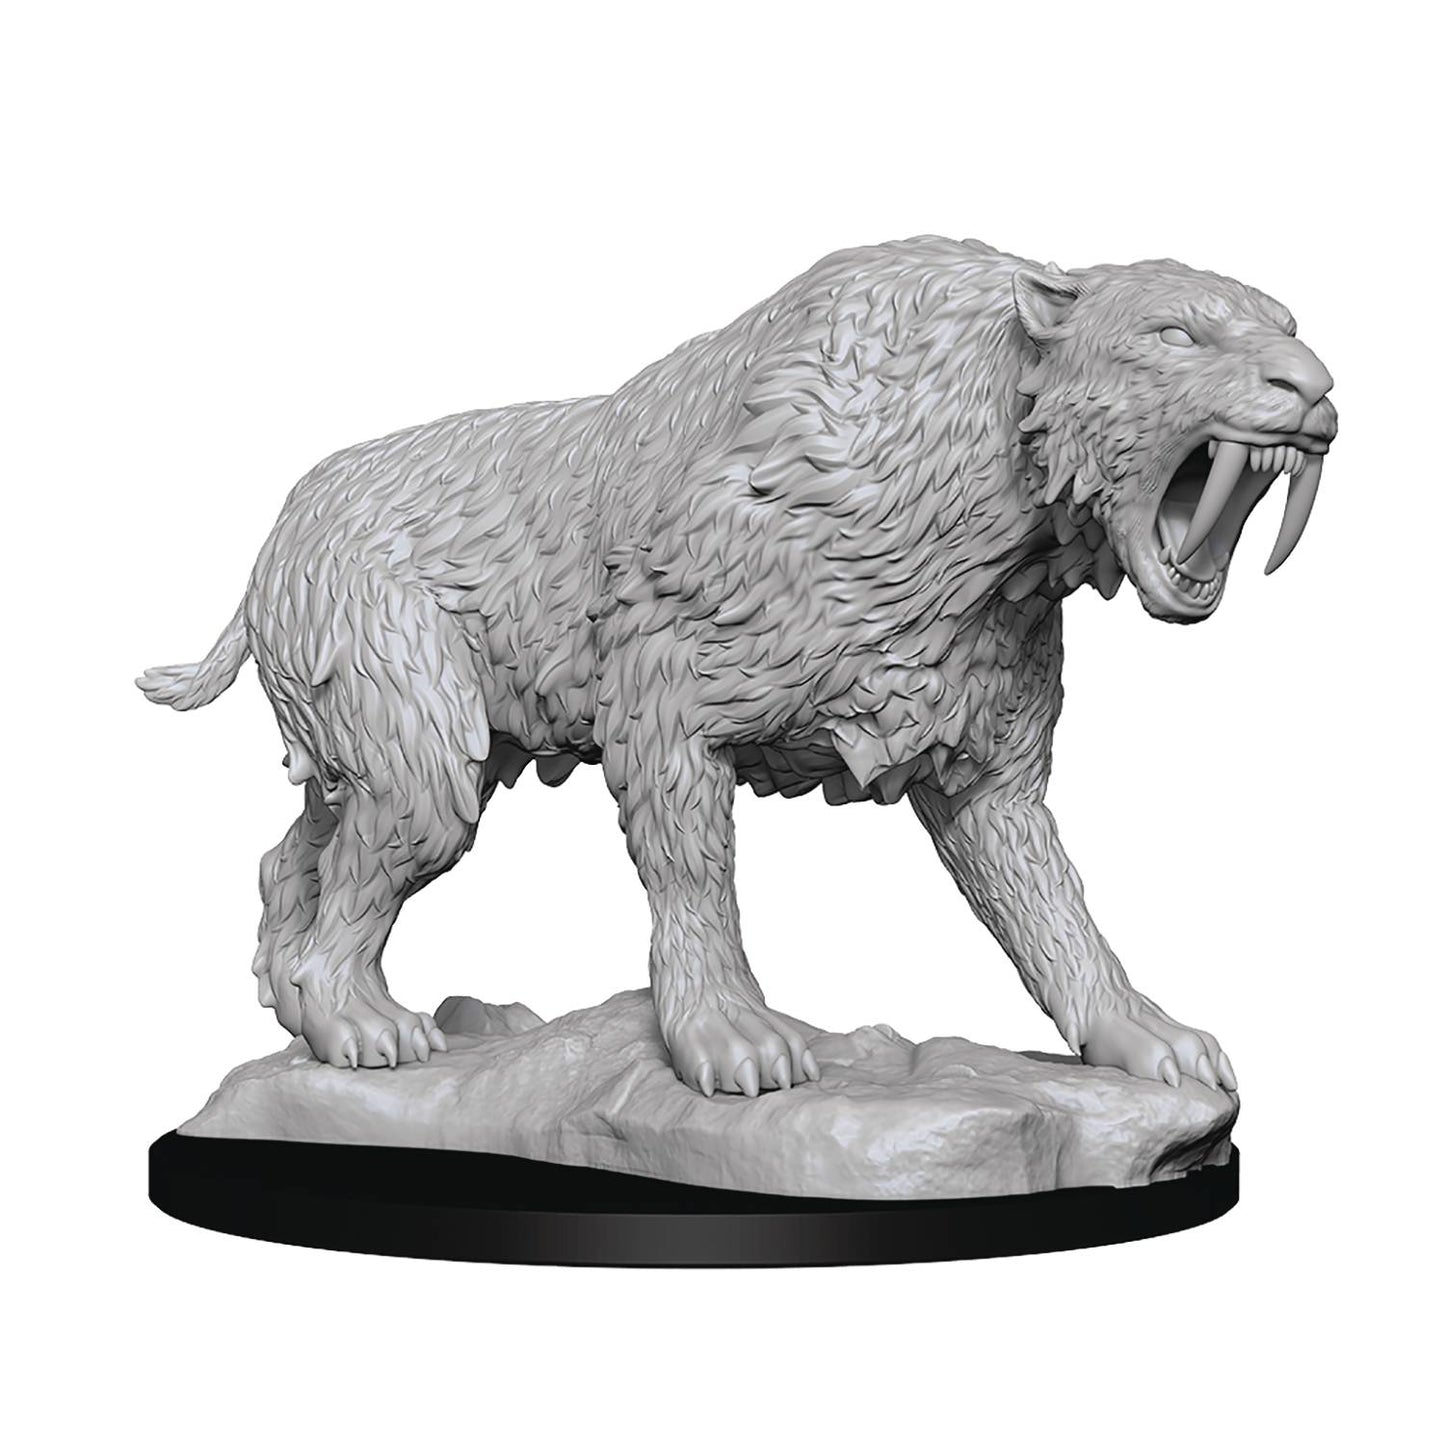 D&D: SABER-TOOTHED TIGER Unpainted Miniature